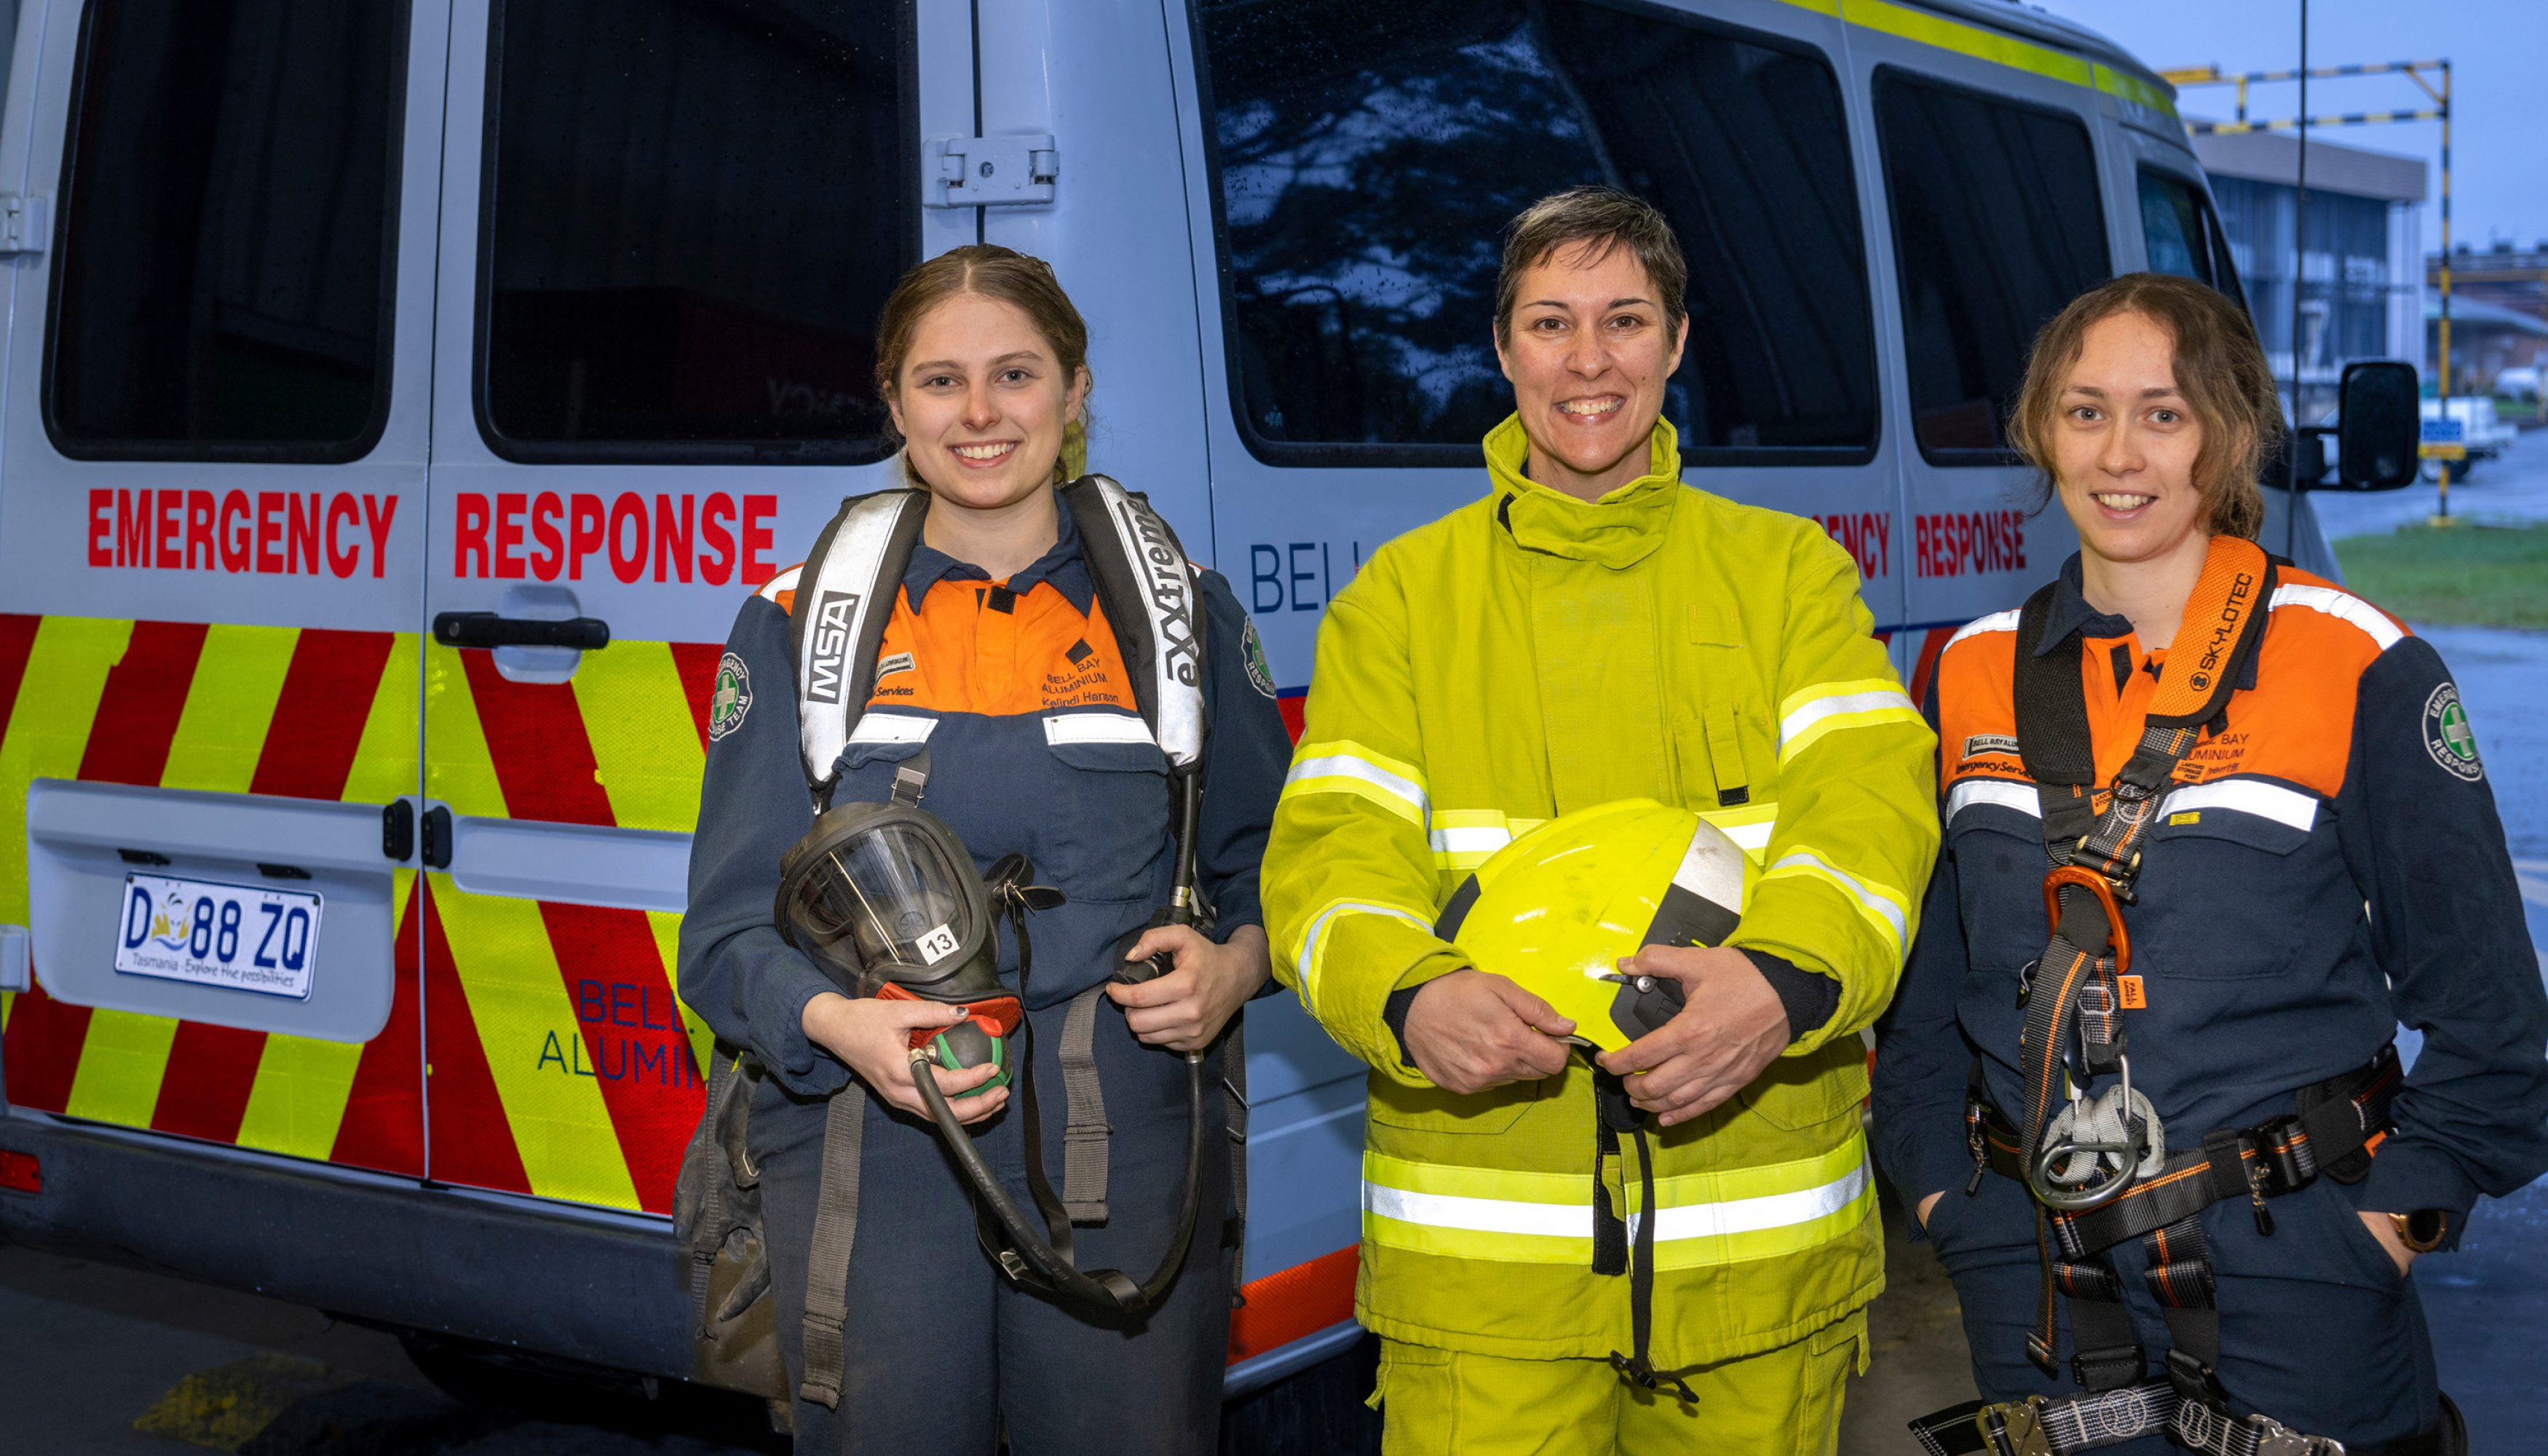 Bell Bay Aluminium team members in Emergency Response Competition